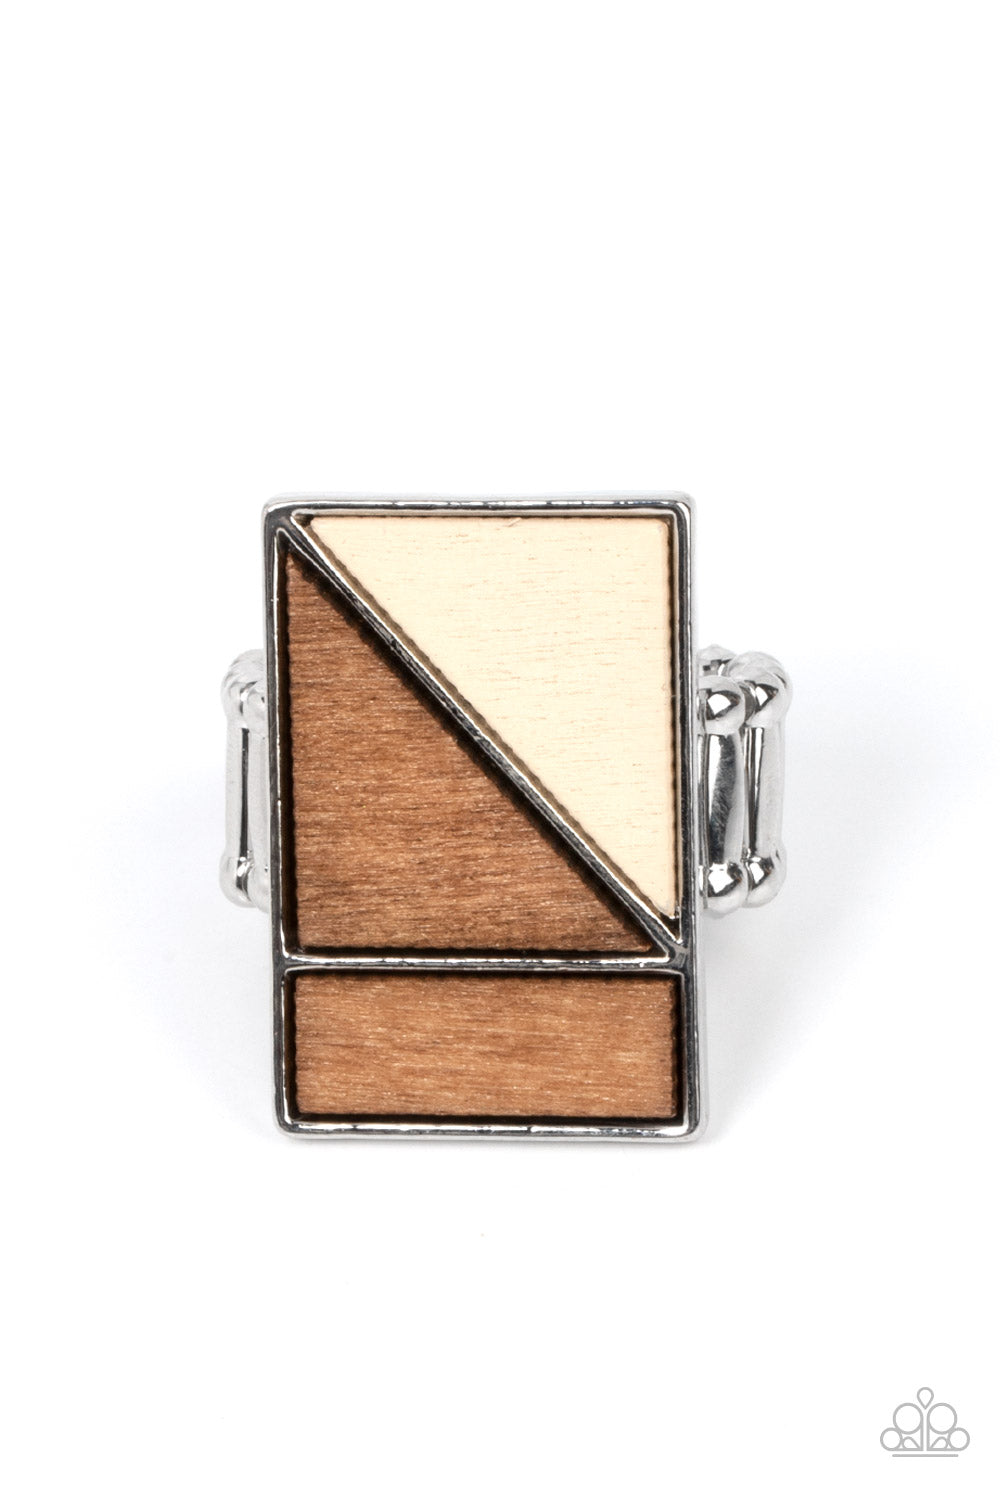 Paparazzi Accessories - Happily EVERGREEN After - Brown Wood Rings featuring natural white and brown finishes, triangular and rectangular wooden frames stack into a geometrically appealing centerpiece atop the finger. Features a stretchy band for a flexible fit.

Sold as one individual ring.

